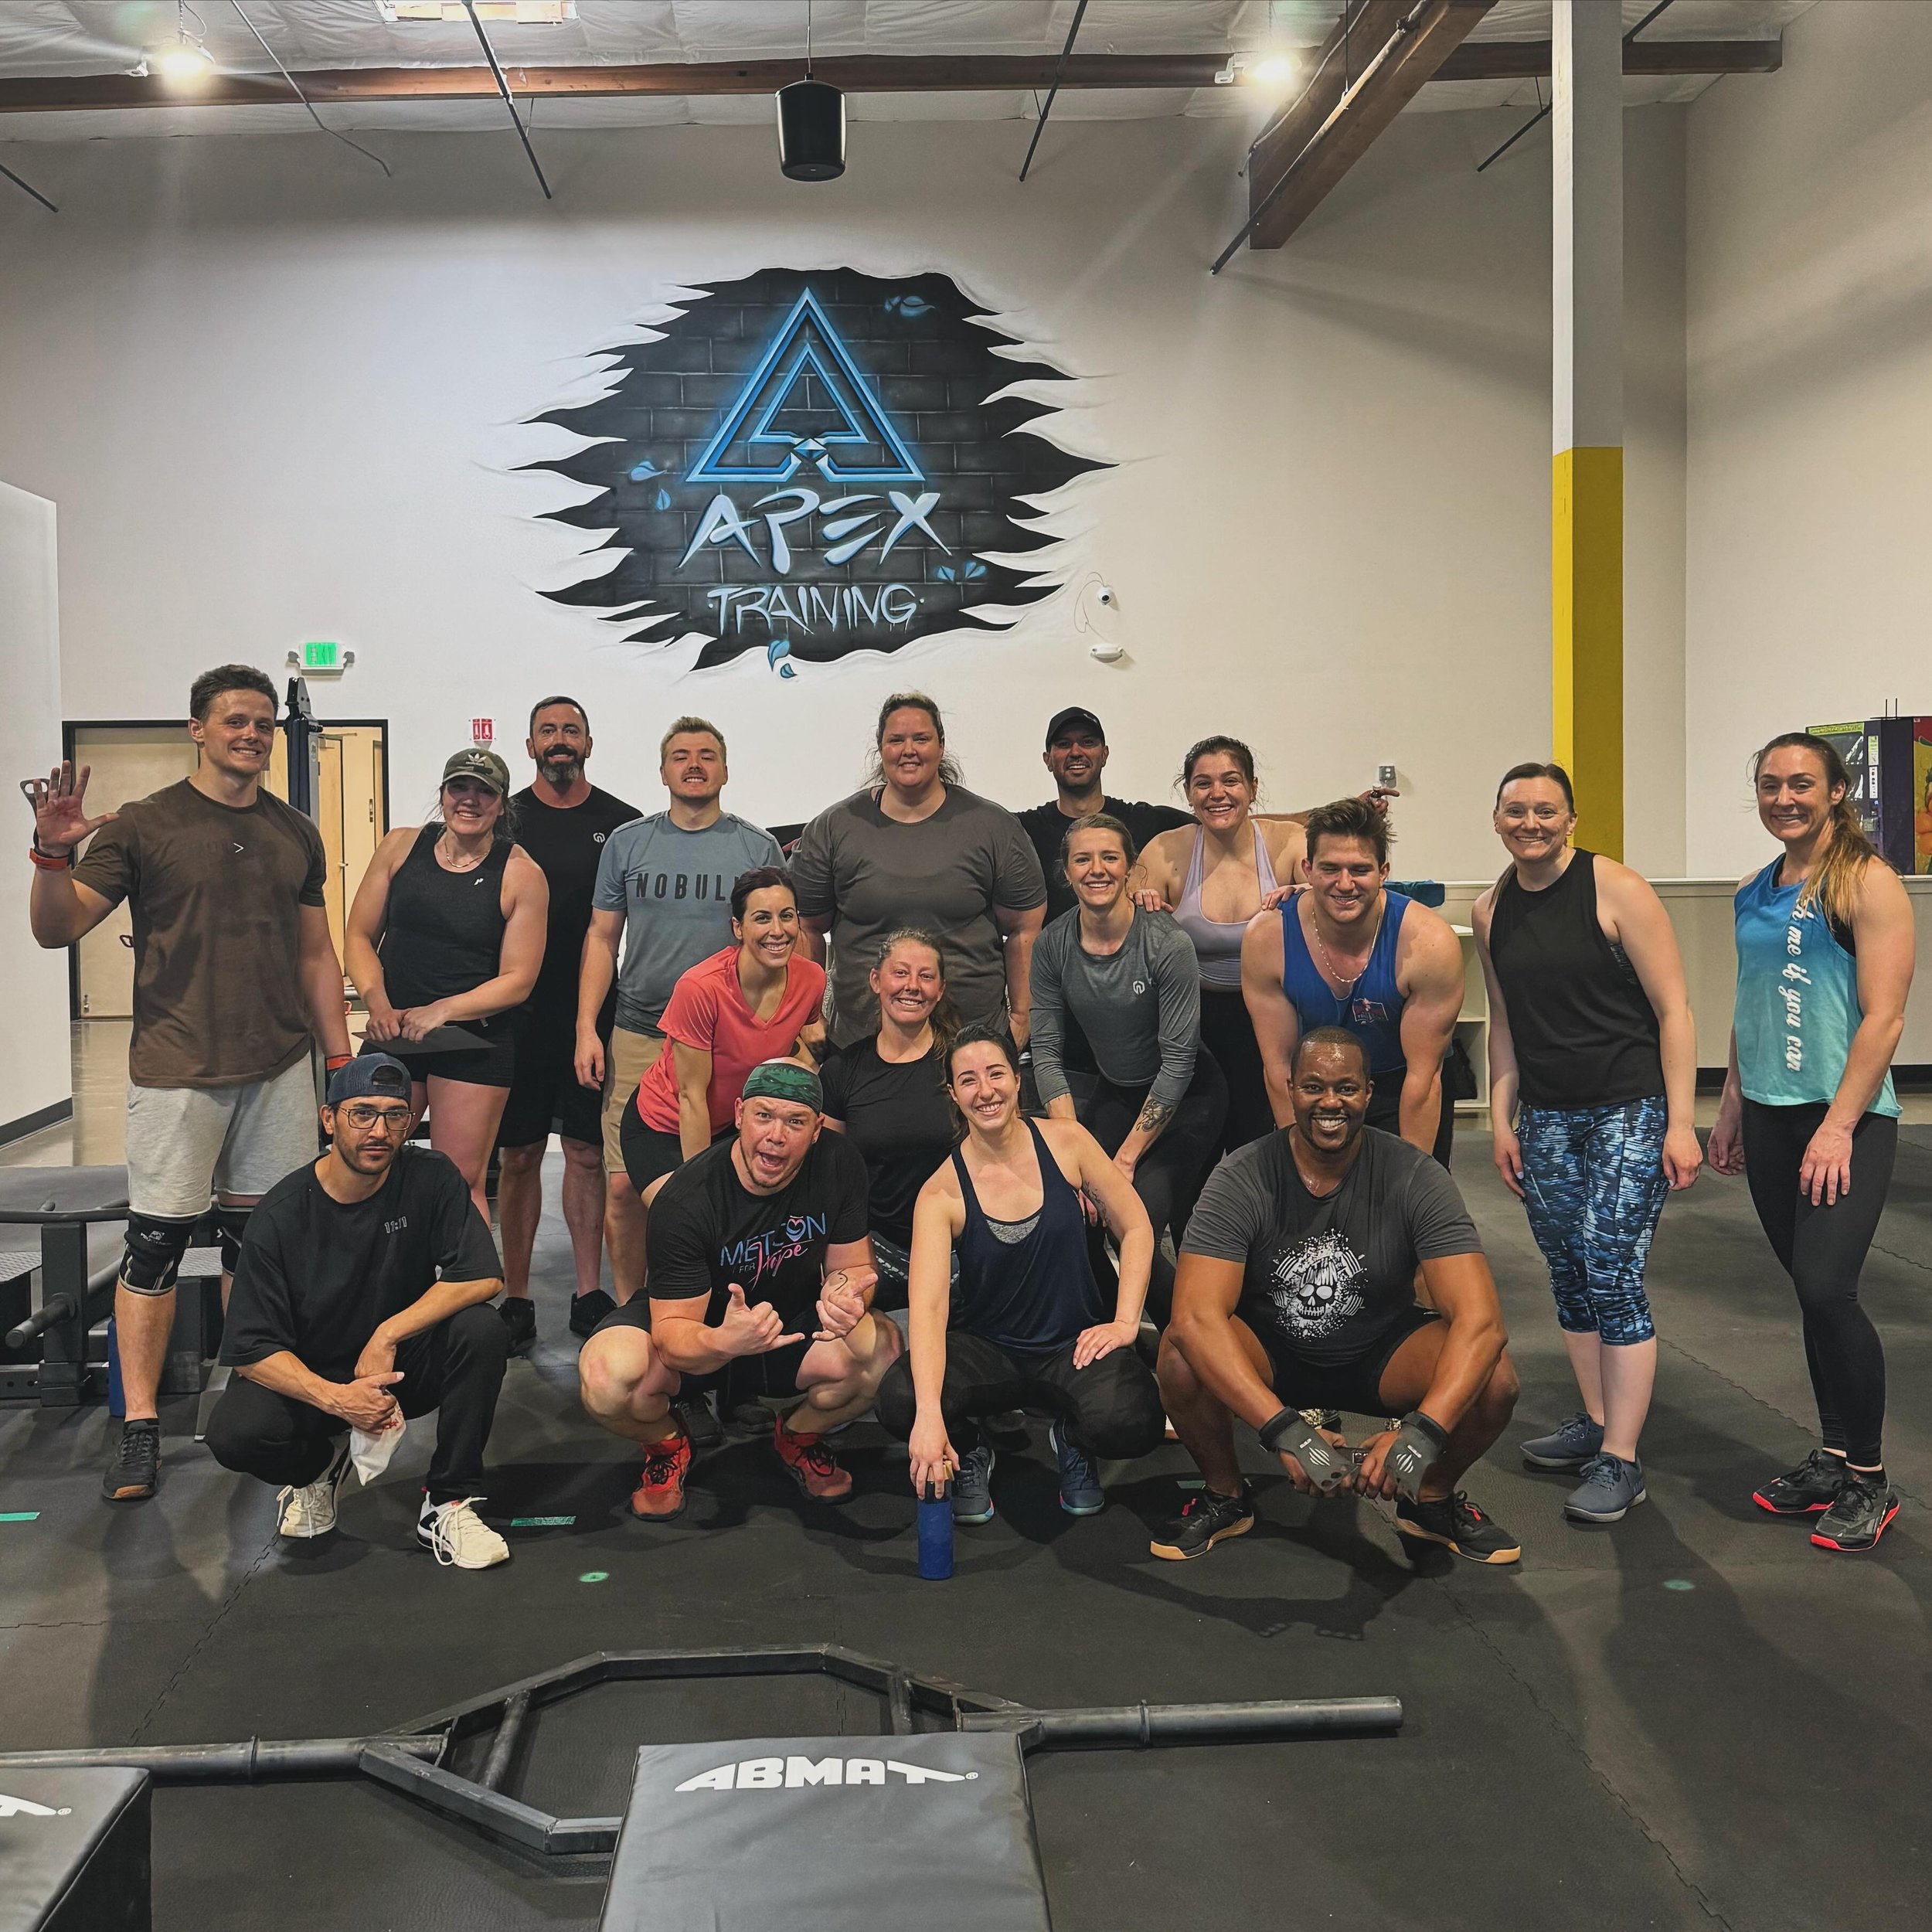 We have a LONG standing tradition with our CrossFit athletes to do specific workouts for their birthday during our Saturday classes! They get to pick their favorite movements, and Coach Jeff uses their birthday numbers to write a unique workout. Some